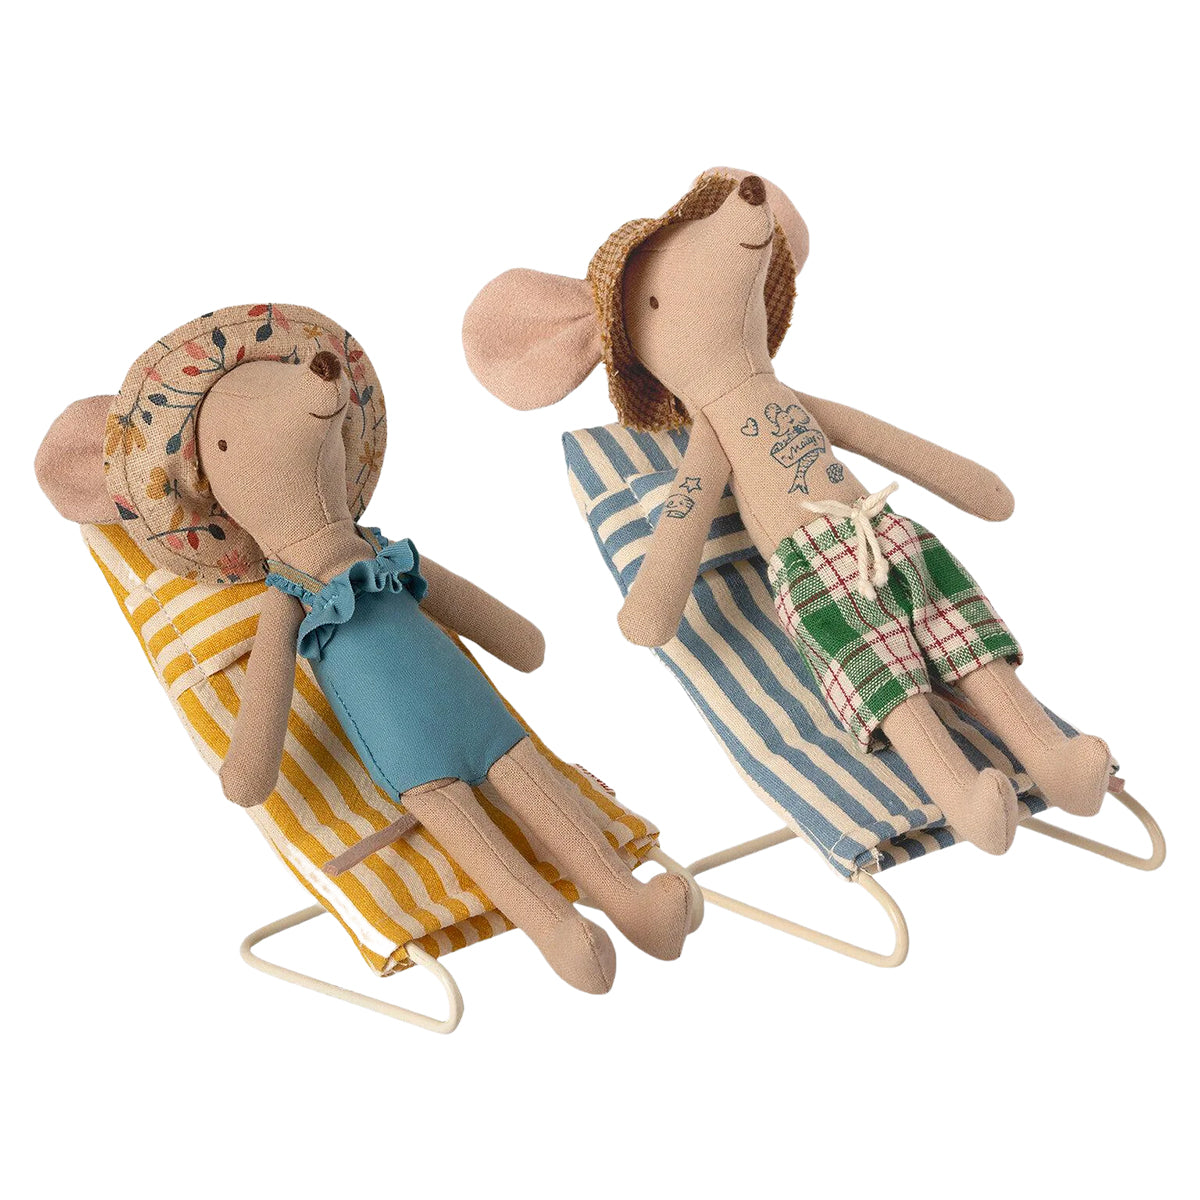 Maileg Mouse Beach Chair Set with Maileg Mum and Dad Mice sunbathing.